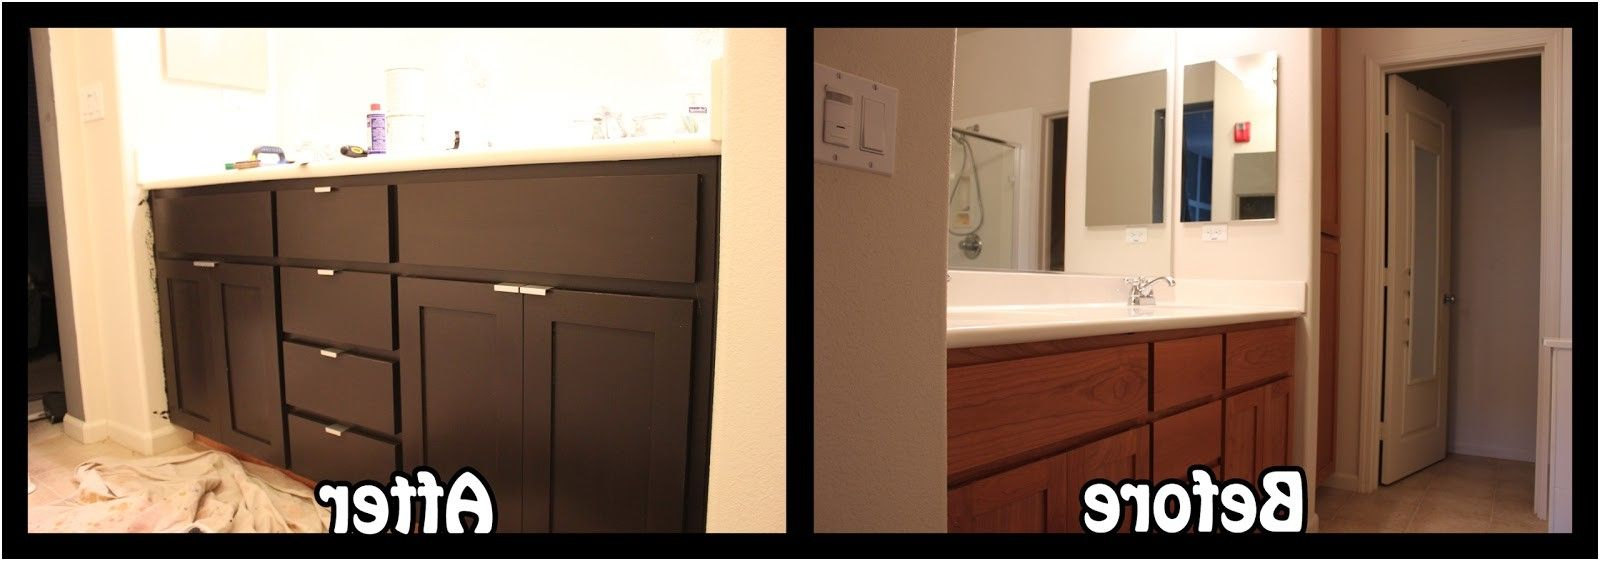 Refacing Bathroom Cabinets Before After Kitchen Cabinet Refacing for dimensions 1600 X 561